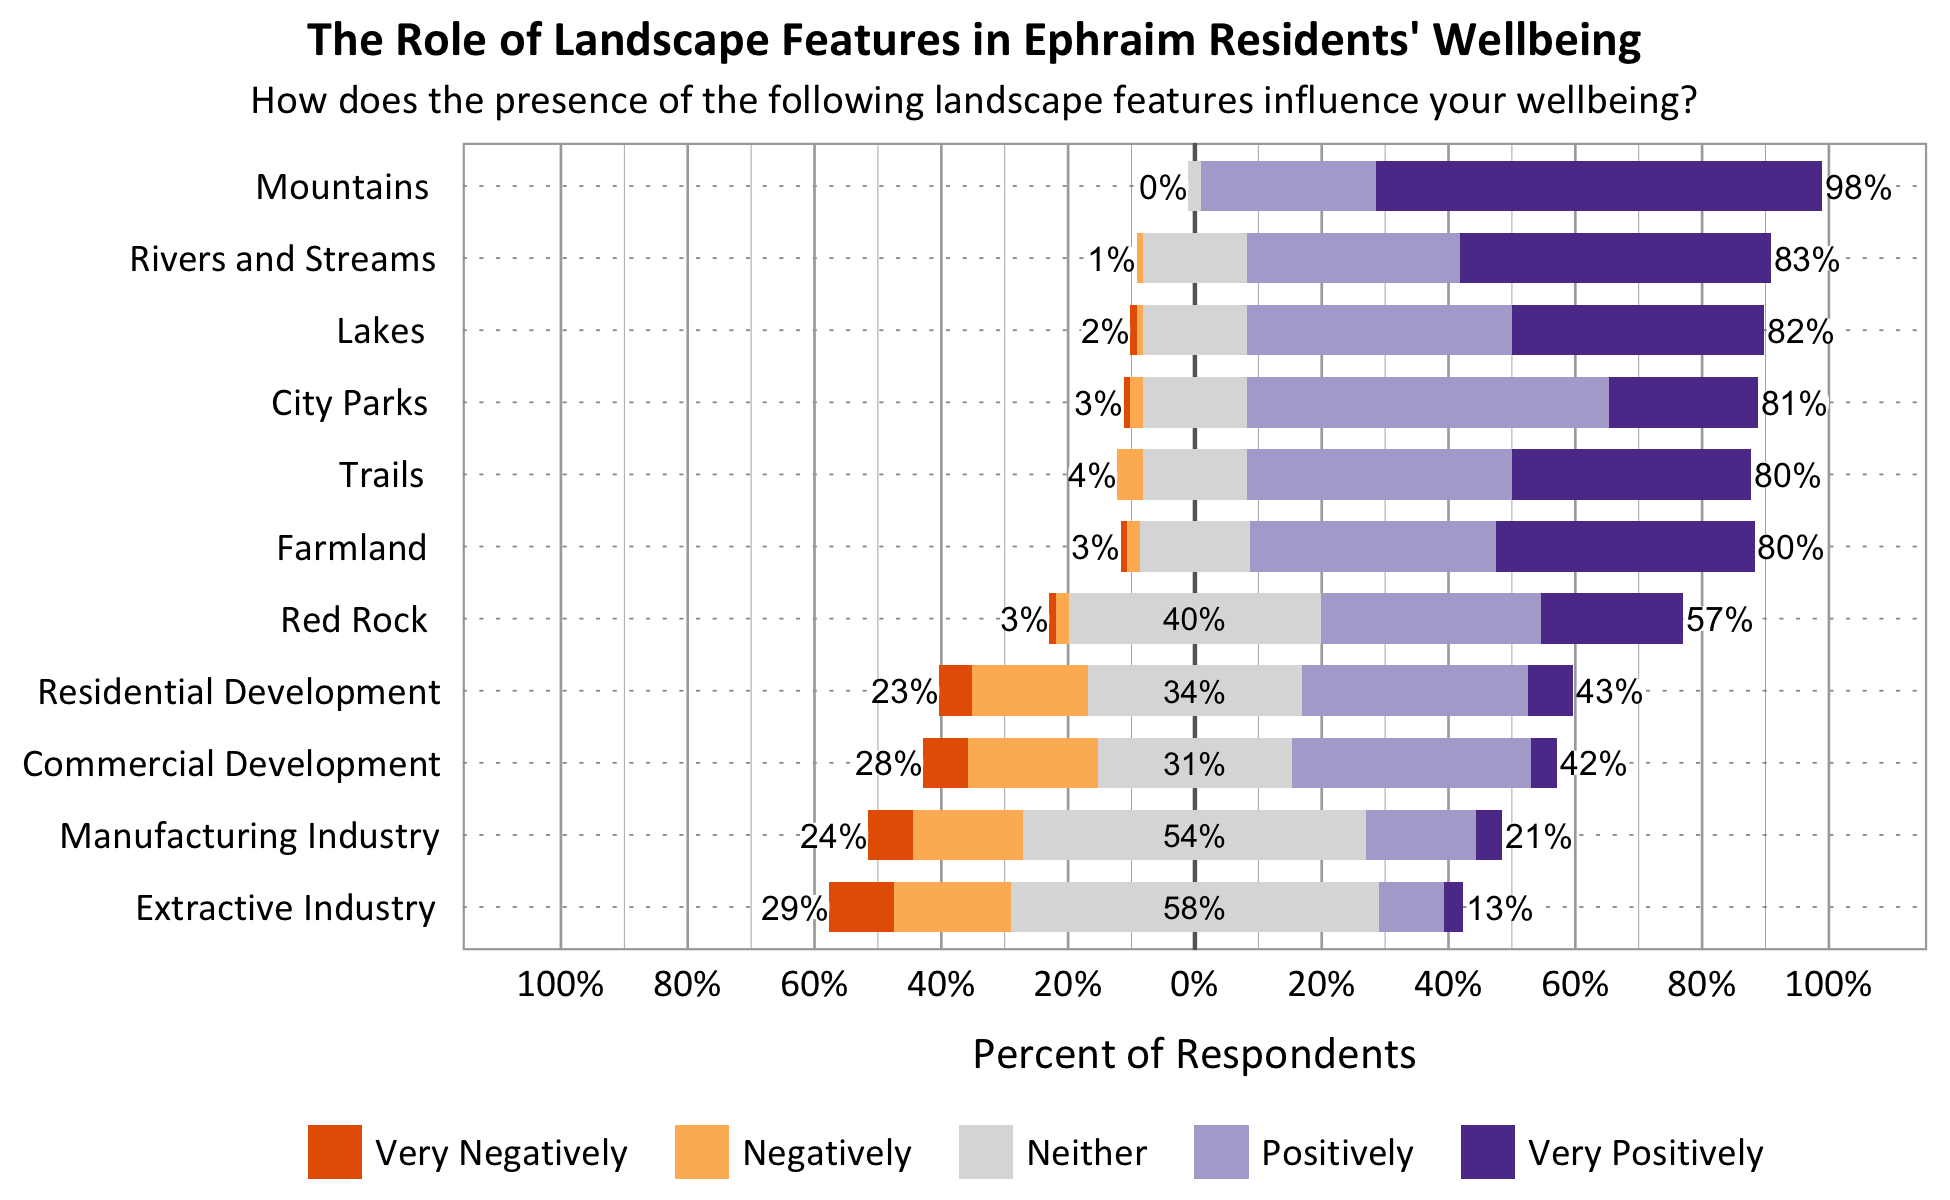 Likert Graph. Title: The Role of Landscape Features in Ephraim Residents' Wellbeing. Subtitle: How does the presence of the following landscape features influence your wellbeing? Feature: Mountains - 0% of respondents indicated very negatively or negatively, 2% indicated neither, 98% indicated positively or very positively; Feature: Rivers and Streams - 1% of respondents indicated very negatively or negatively, 16% indicated neither, 83% indicated positively or very positively; Feature: Lakes - 2% of respondents indicated very negatively or negatively, 16% indicated neither, 82% indicated positively or very positively; Feature: Trails - 4% of respondents indicated very negatively or negatively, 16% indicated neither, 80% indicated positively or very positively; Feature: Red Rock - 3% of respondents indicated very negatively or negatively, 40% indicated neither, 57% indicated positively or very positively; Feature: City Parks - 3% of respondents indicated very negatively or negatively, 16% indicated neither, 81% indicated positively or very positively; Feature: Farmland - 3% of respondents indicated very negatively or negatively, 17% indicated neither, 80% indicated positively or very positively; Feature: Residential Development - 23% of respondents indicated very negatively or negatively, 34% indicated neither, 43% indicated positively or very positively; Feature: Commercial Development - 28% of respondents indicated very negatively or negatively, 31% indicated neither, 42% indicated positively or very positively; Feature: Extractive Industry - 29% of respondents indicated very negatively or negatively, 58% indicated neither, 13% indicated positively or very positively; Feature: Manufacturing Industry - 24% of respondents indicated very negatively or negatively, 54% indicated neither, 21% indicated positively or very positively.